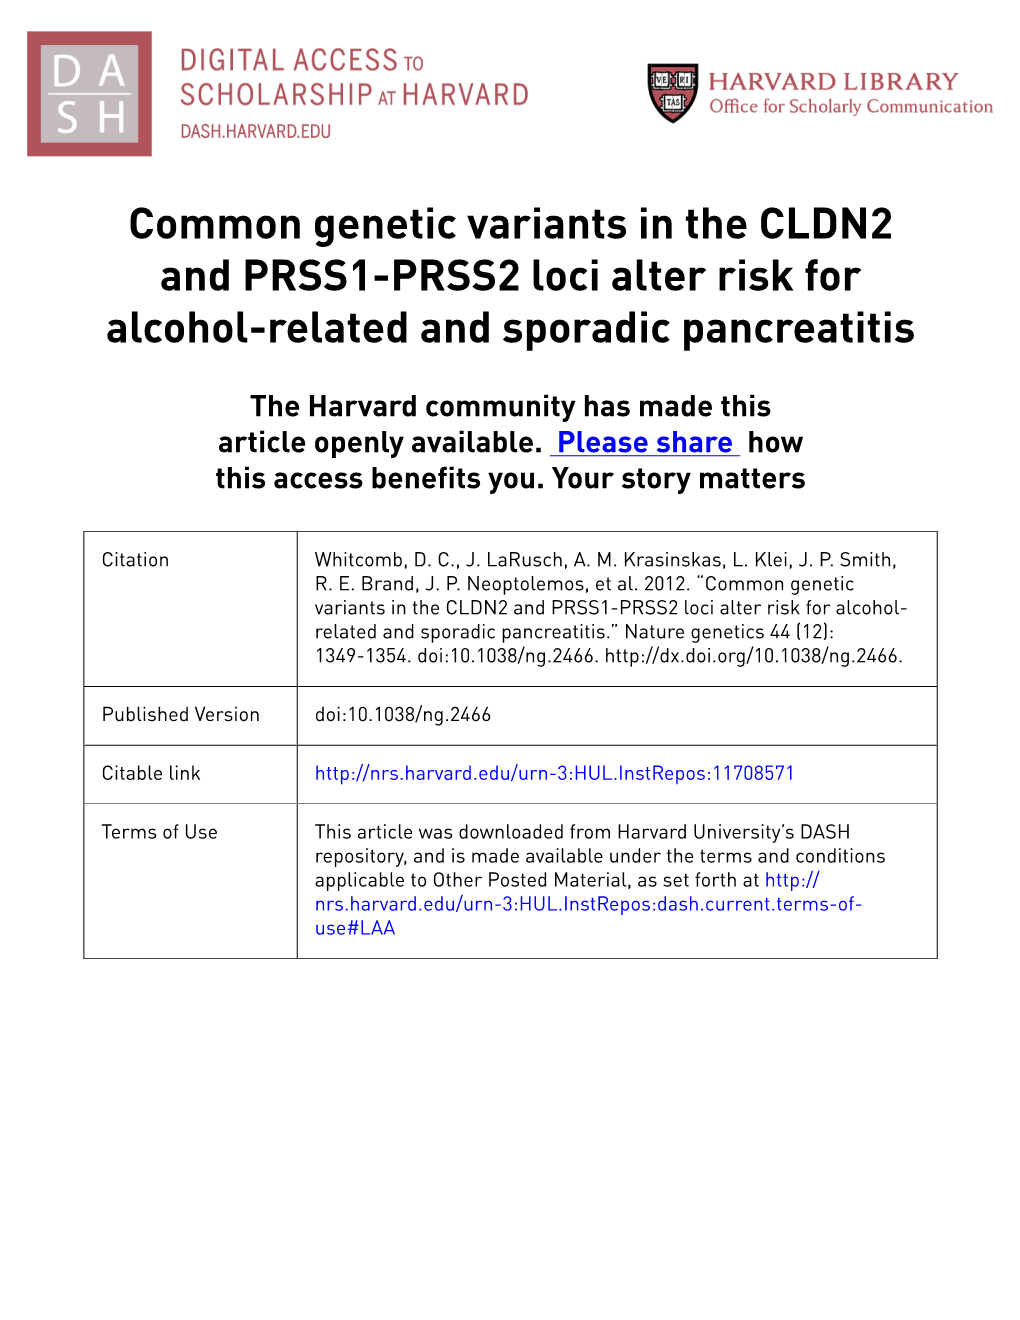 Common Genetic Variants in the CLDN2 and PRSS1-PRSS2 Loci Alter Risk for Alcohol-Related and Sporadic Pancreatitis